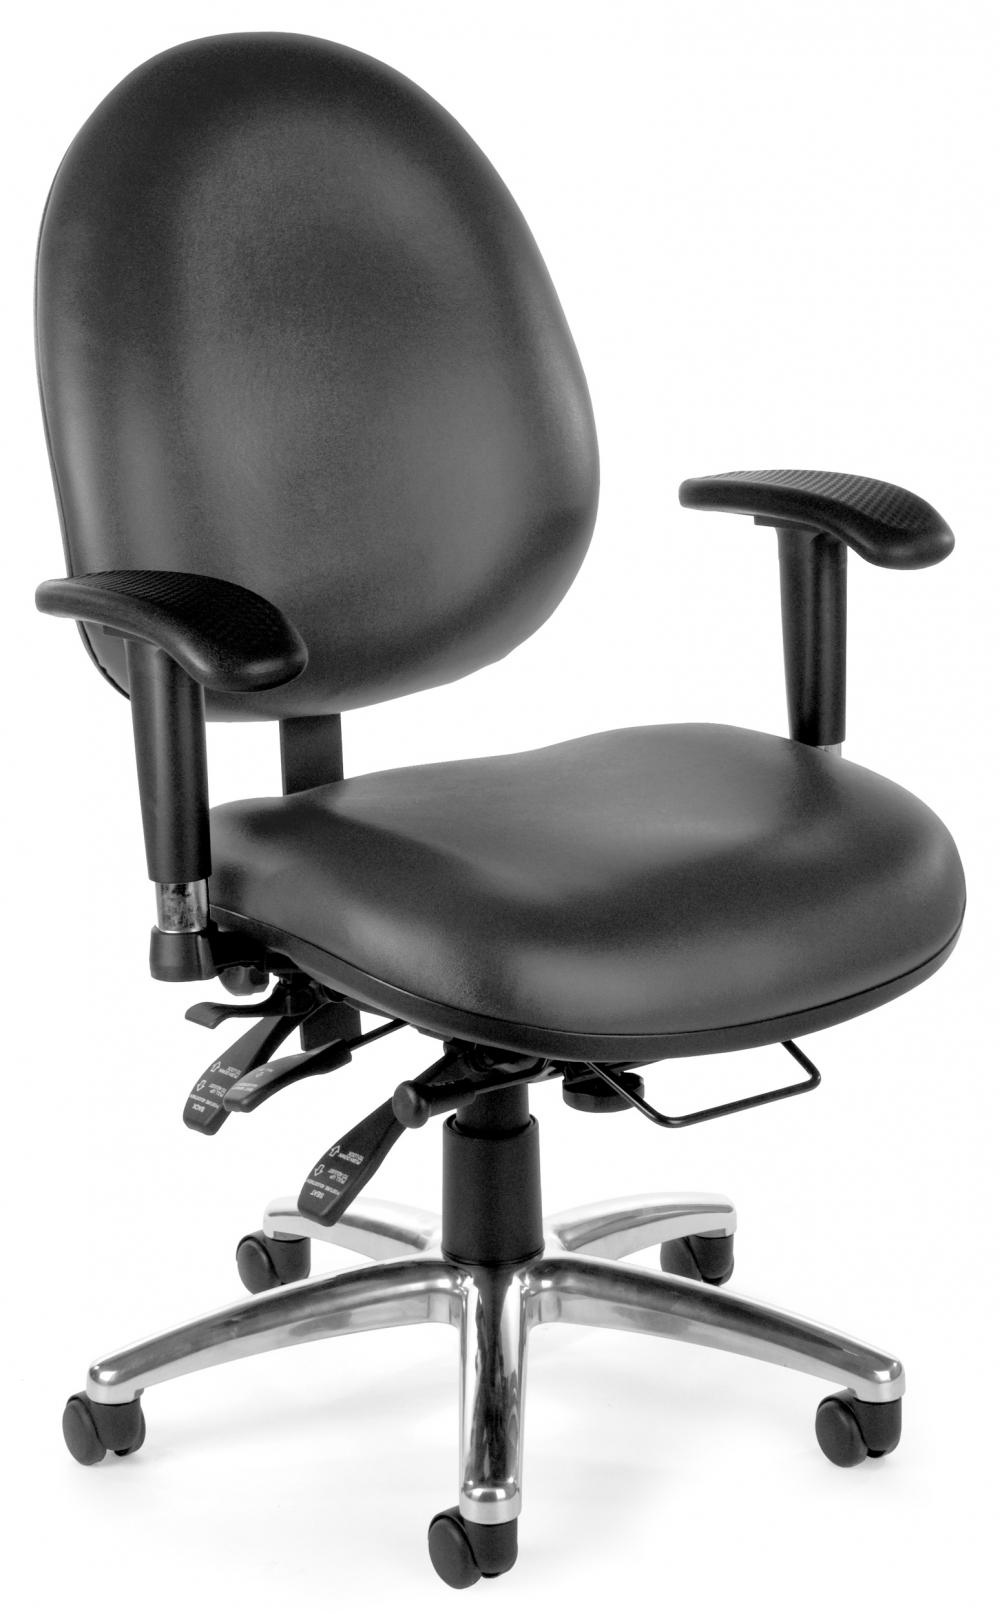 big-and-tall-office-chairs-big-and-tall-task-chair.jpg